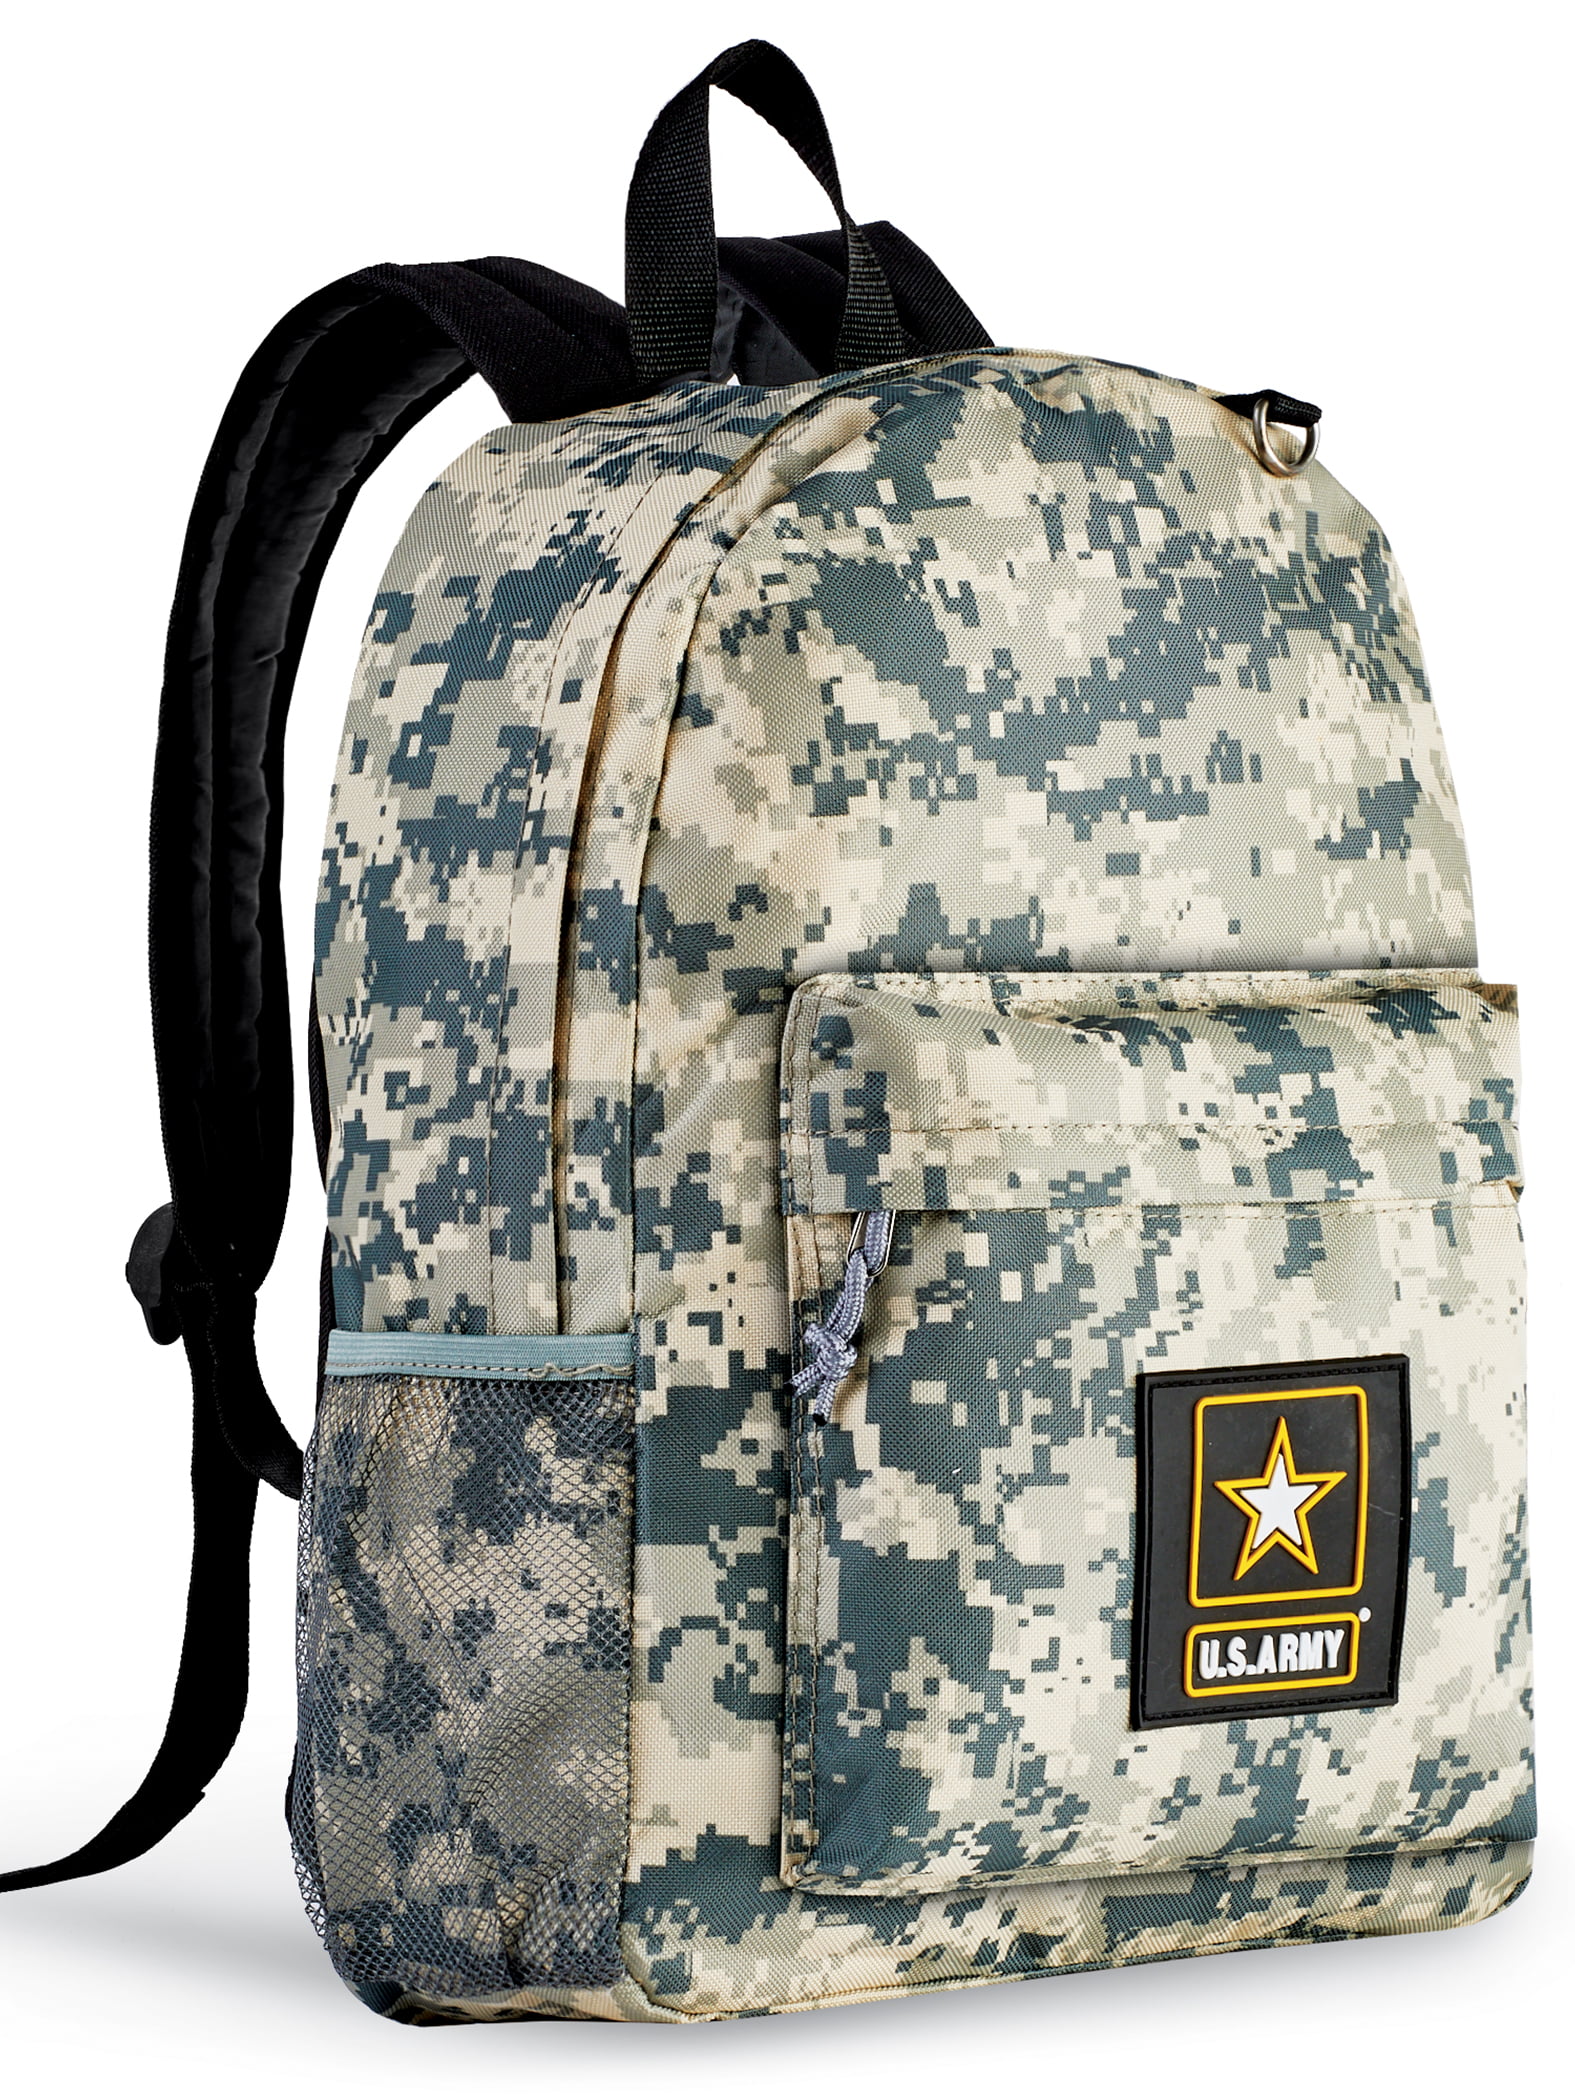 *BRAND NEW* ACU Digital Camo Army Military Sling Backpack Bags Camouflage Gym 